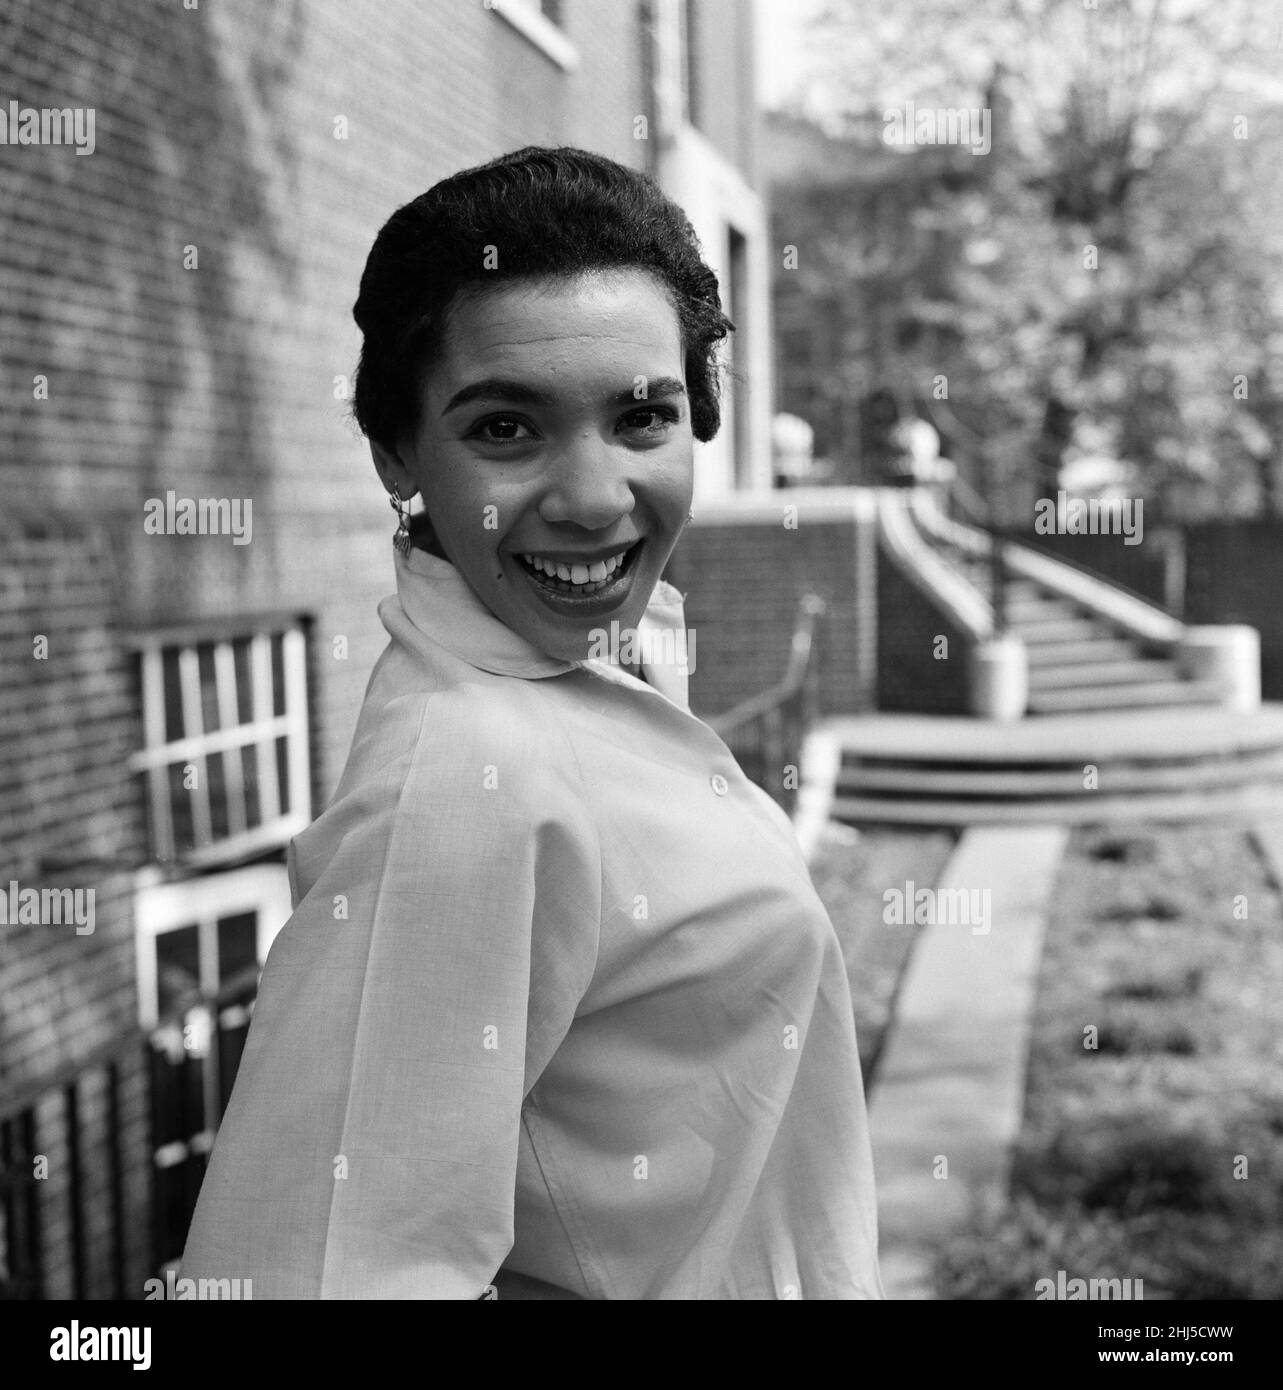 Shirley Bassey rehearsing for ITV's Frankie Howerd Show at ITV rehearsal studios in Sharpe House. She is rehearsing the song of 'If I had a needle and thread'. May 1957. Stock Photo